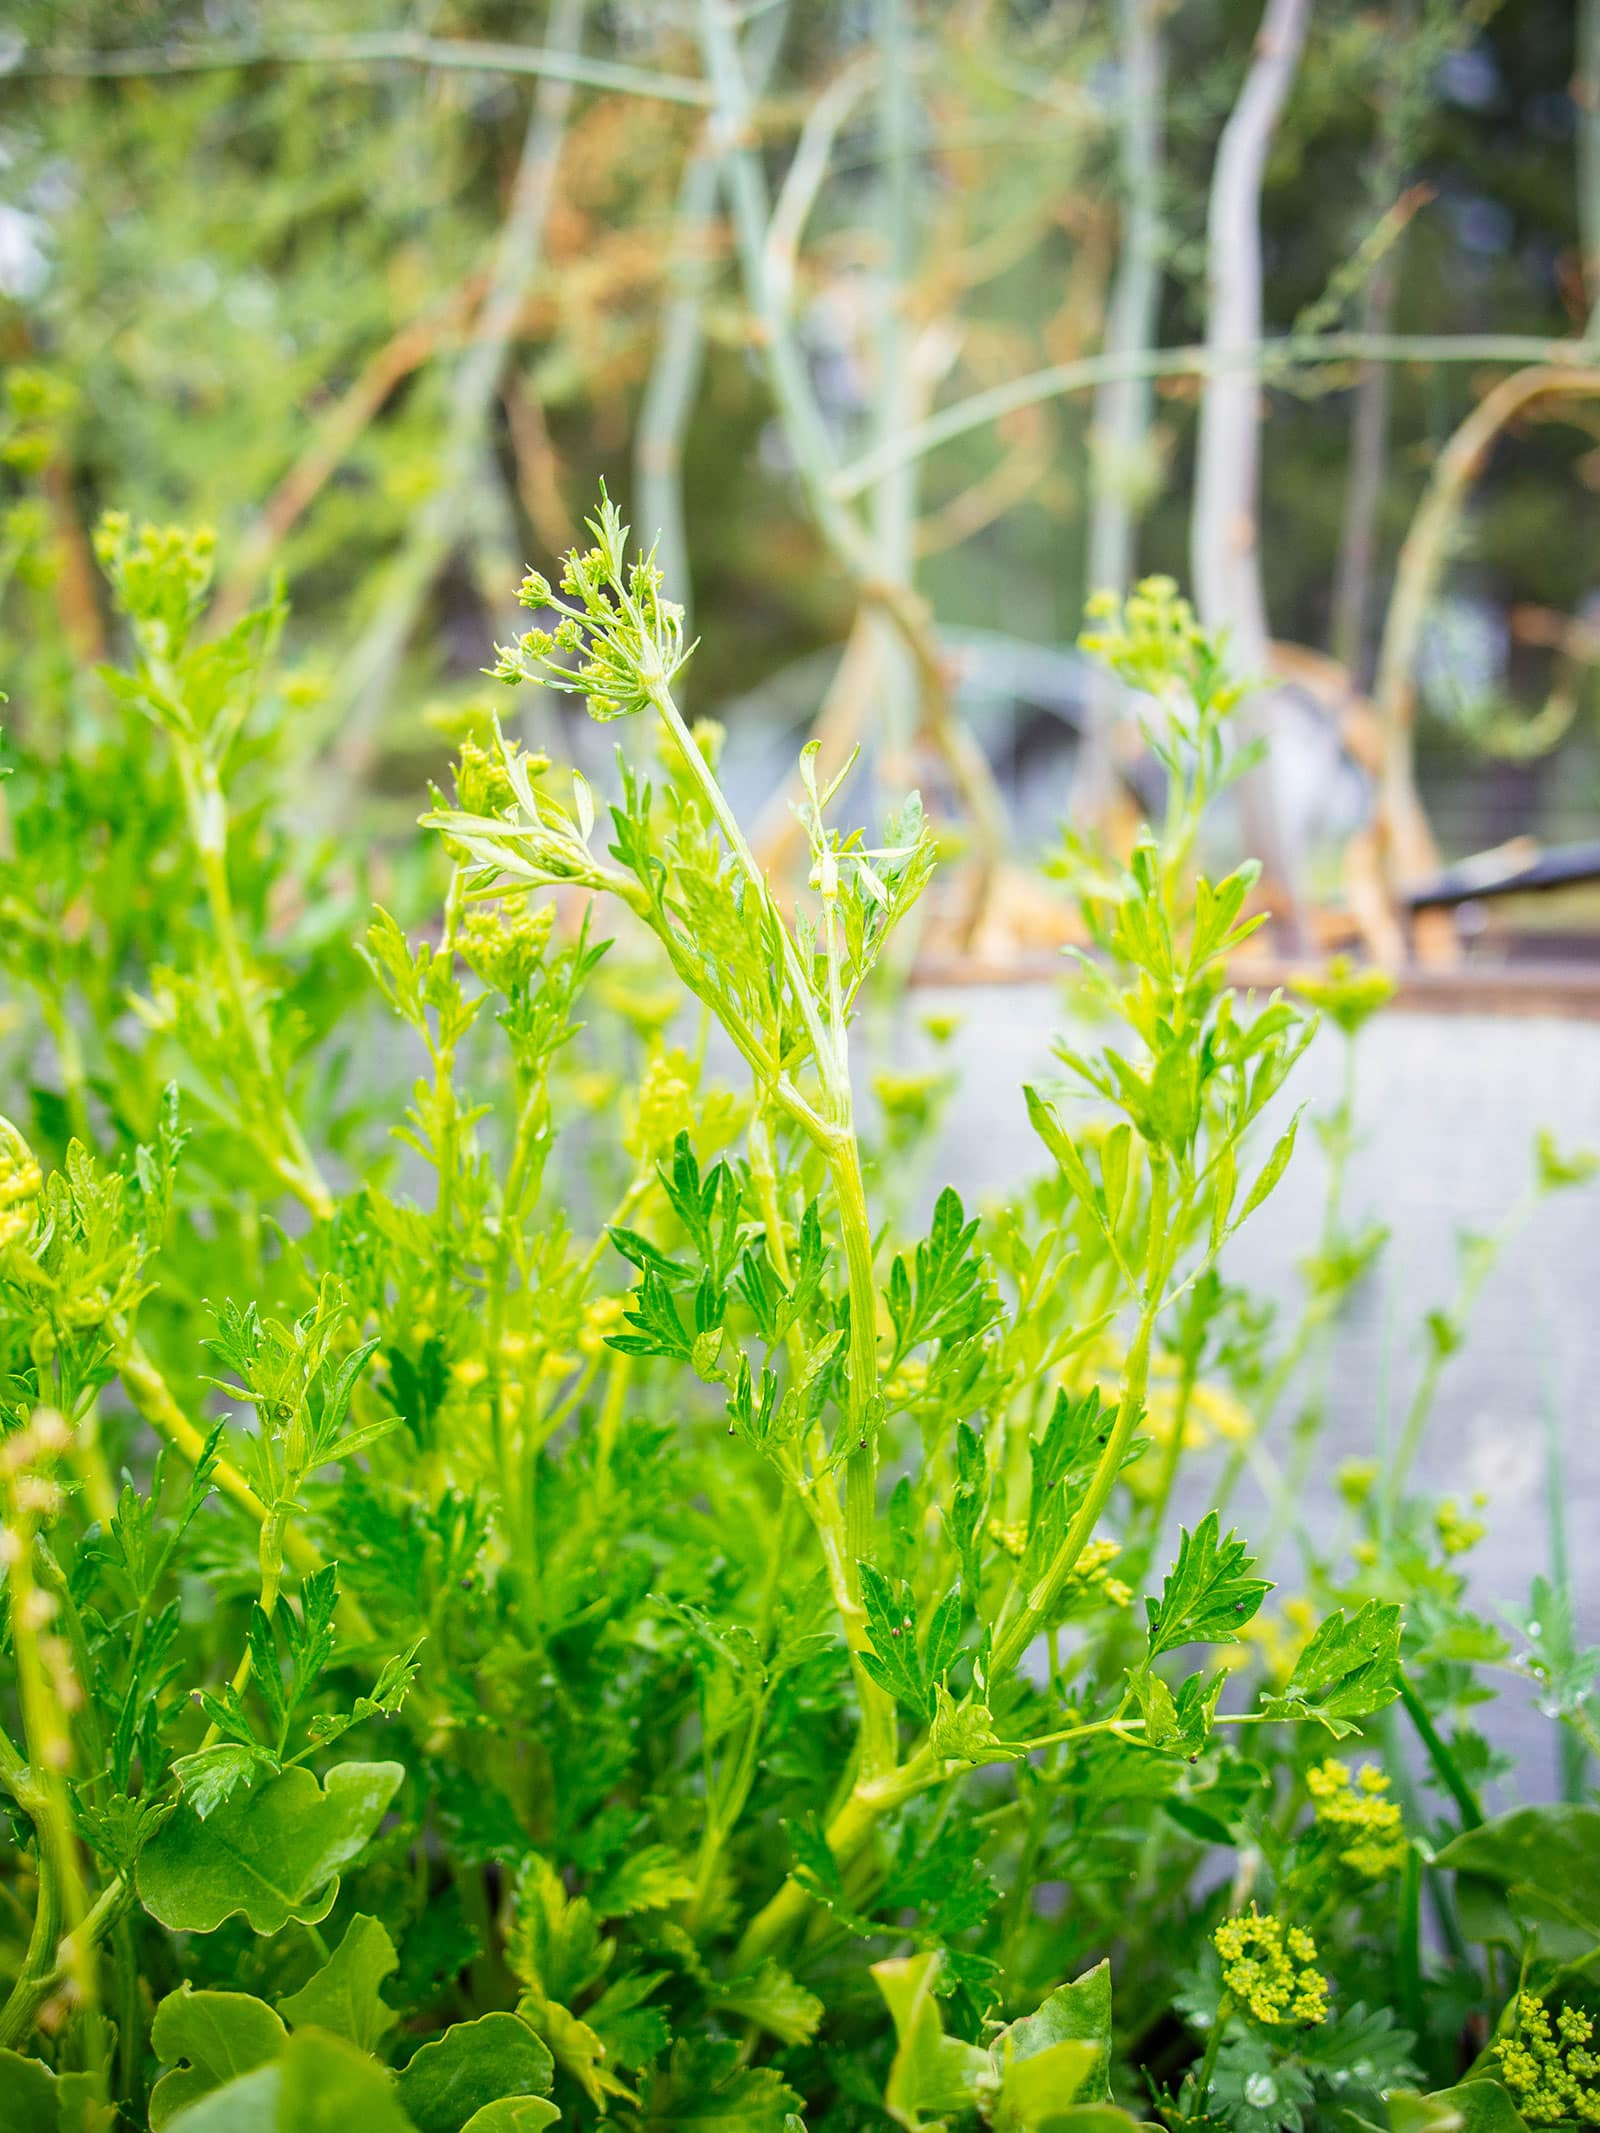 Multiple flower stems and yellow florets on bolted cilantro plant